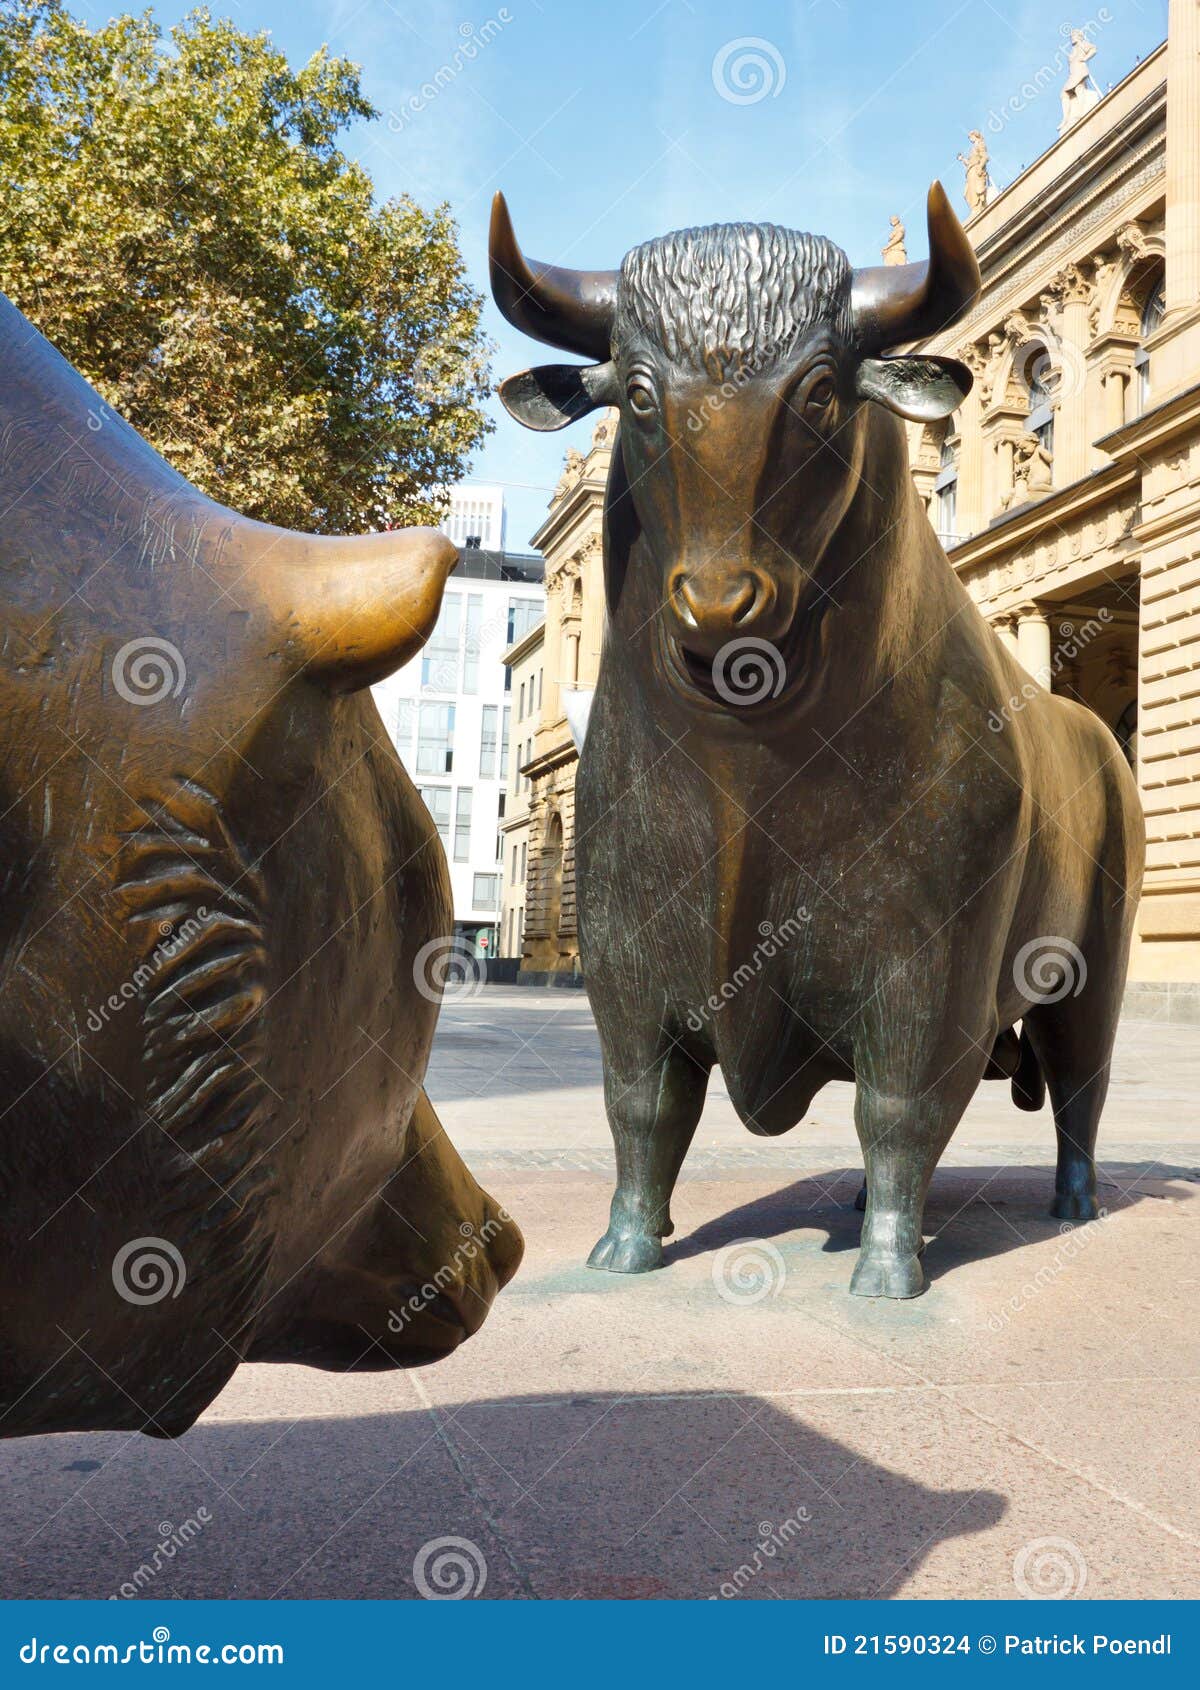 An evaluation of the bull market in stock exchange markets in united states